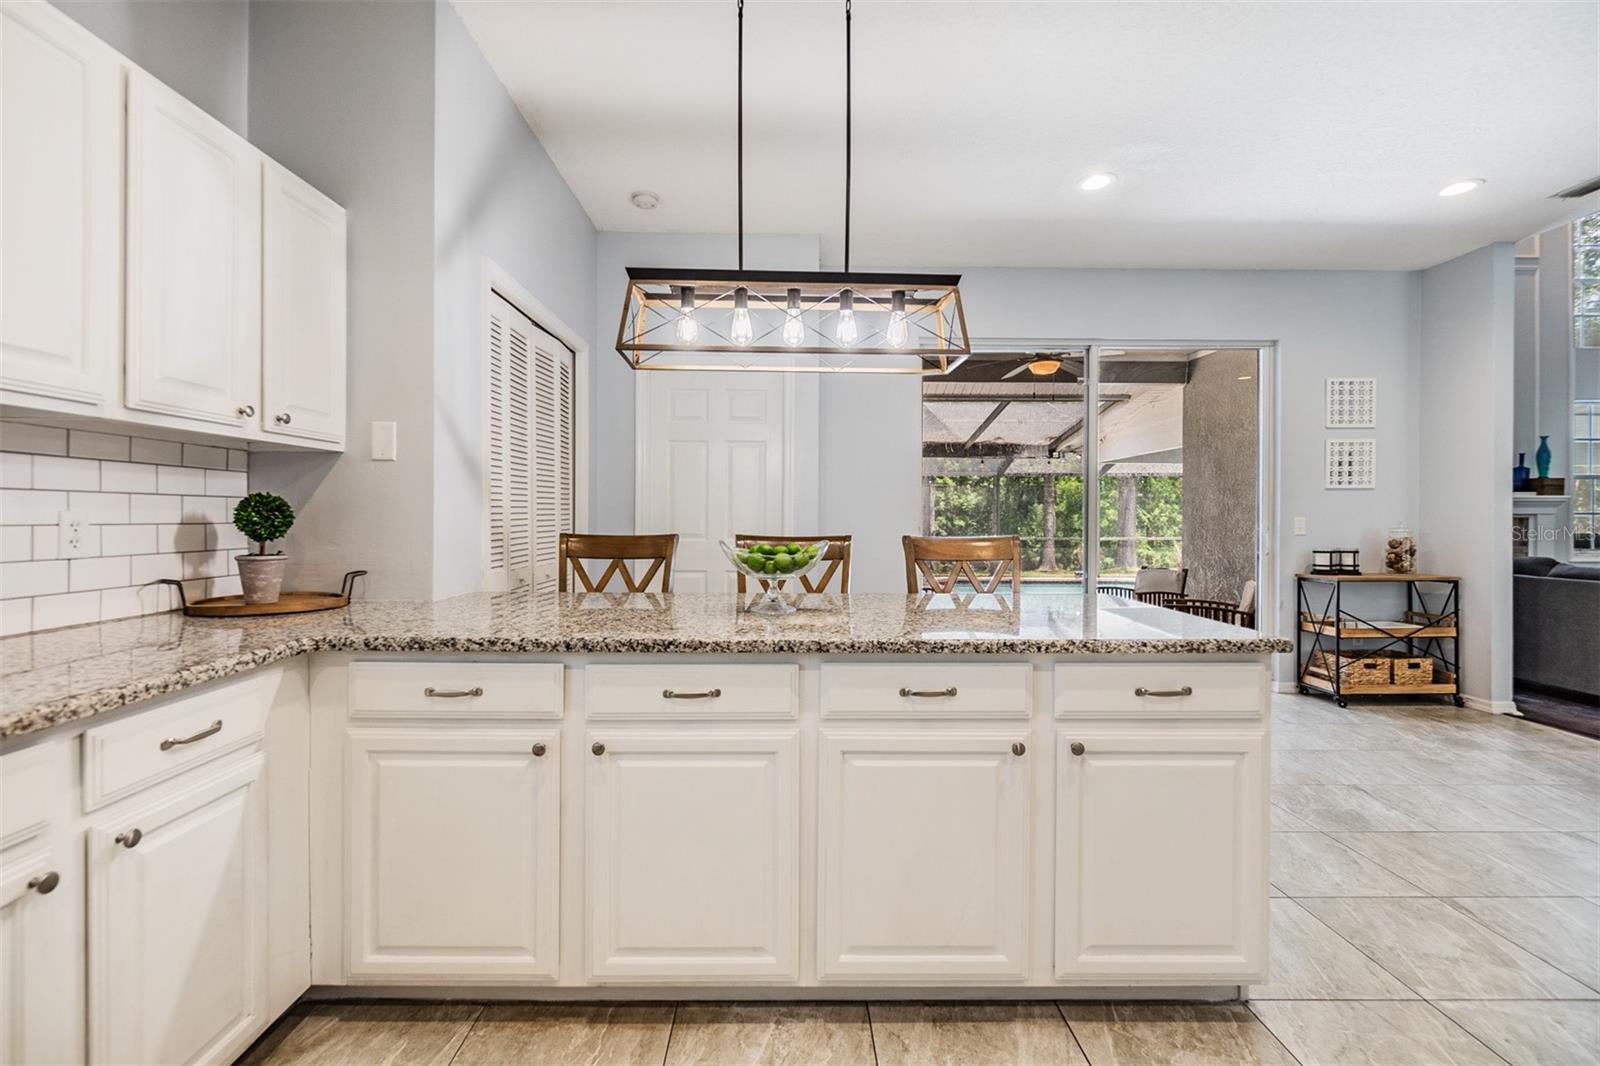 Large and Open kitchen with new light fixture, inset lighting, Subway Tile backsplash, Bar area, Granite Countertops, and Stainless Steel appliances.